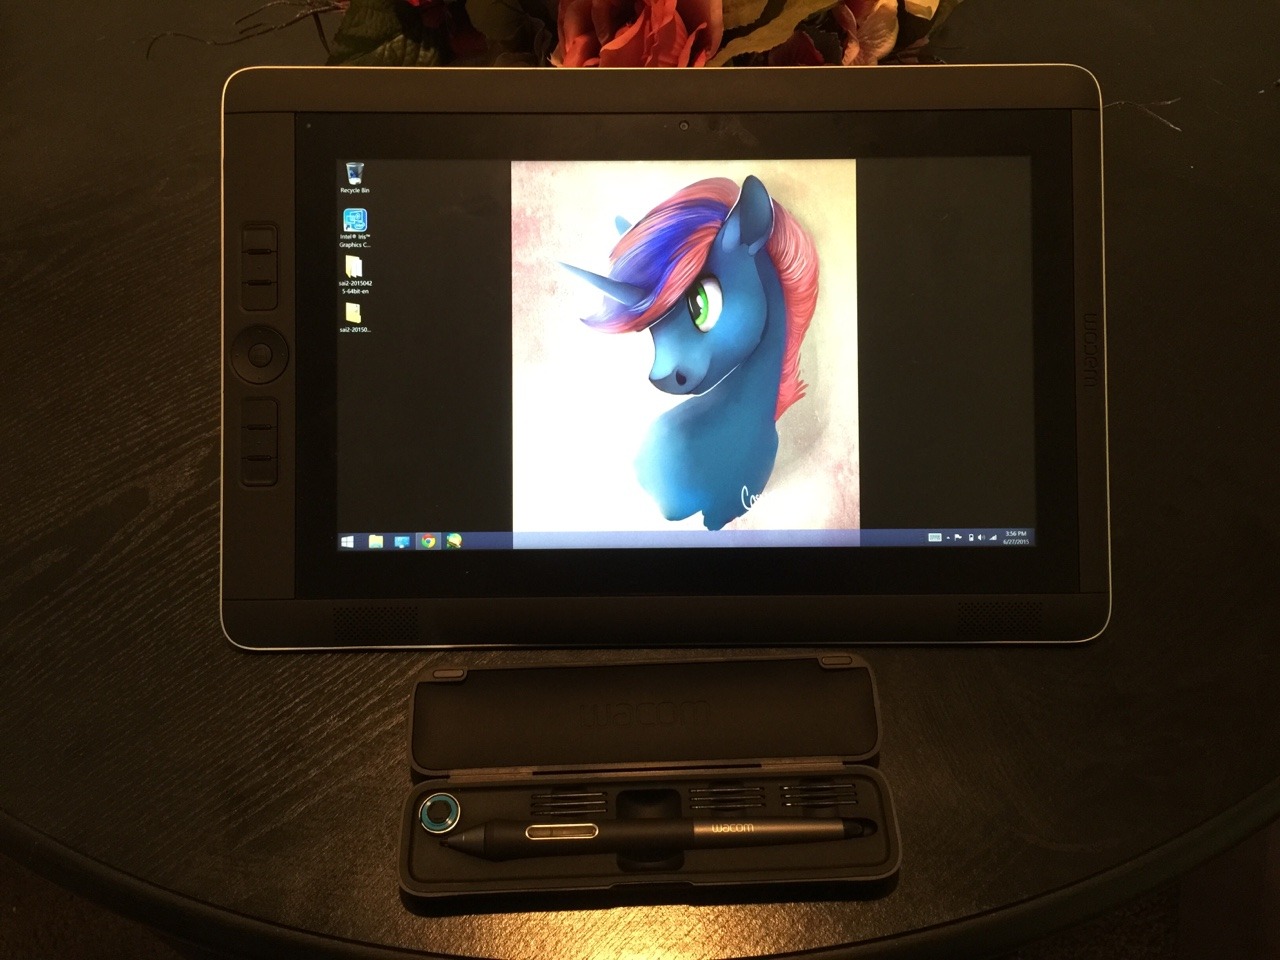 Hey guys! Check it out! After returning my last cintiq companion 2, I got a new one!